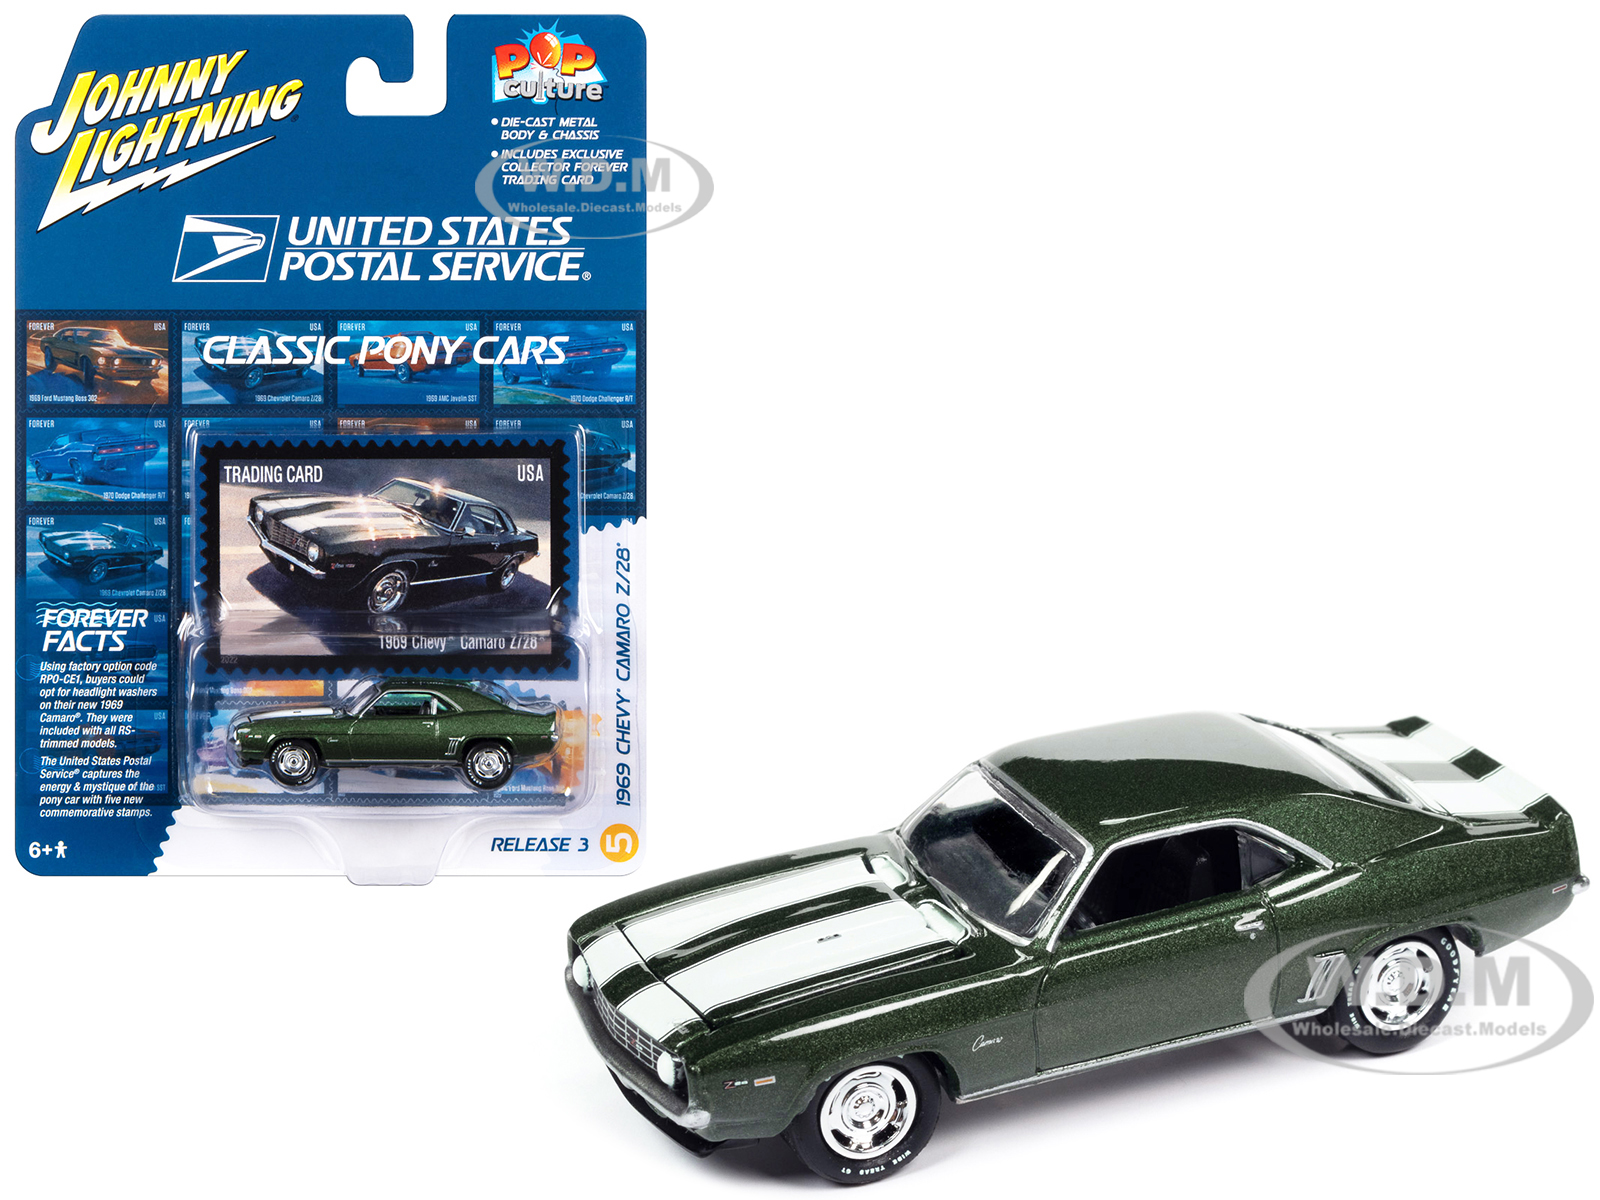 1969 Chevrolet Camaro Z/28 Green Metallic with White Stripes United States Postal Service Pop Culture 2023 Release 3  1/64 Diecast Model Car by Johnny Lightning